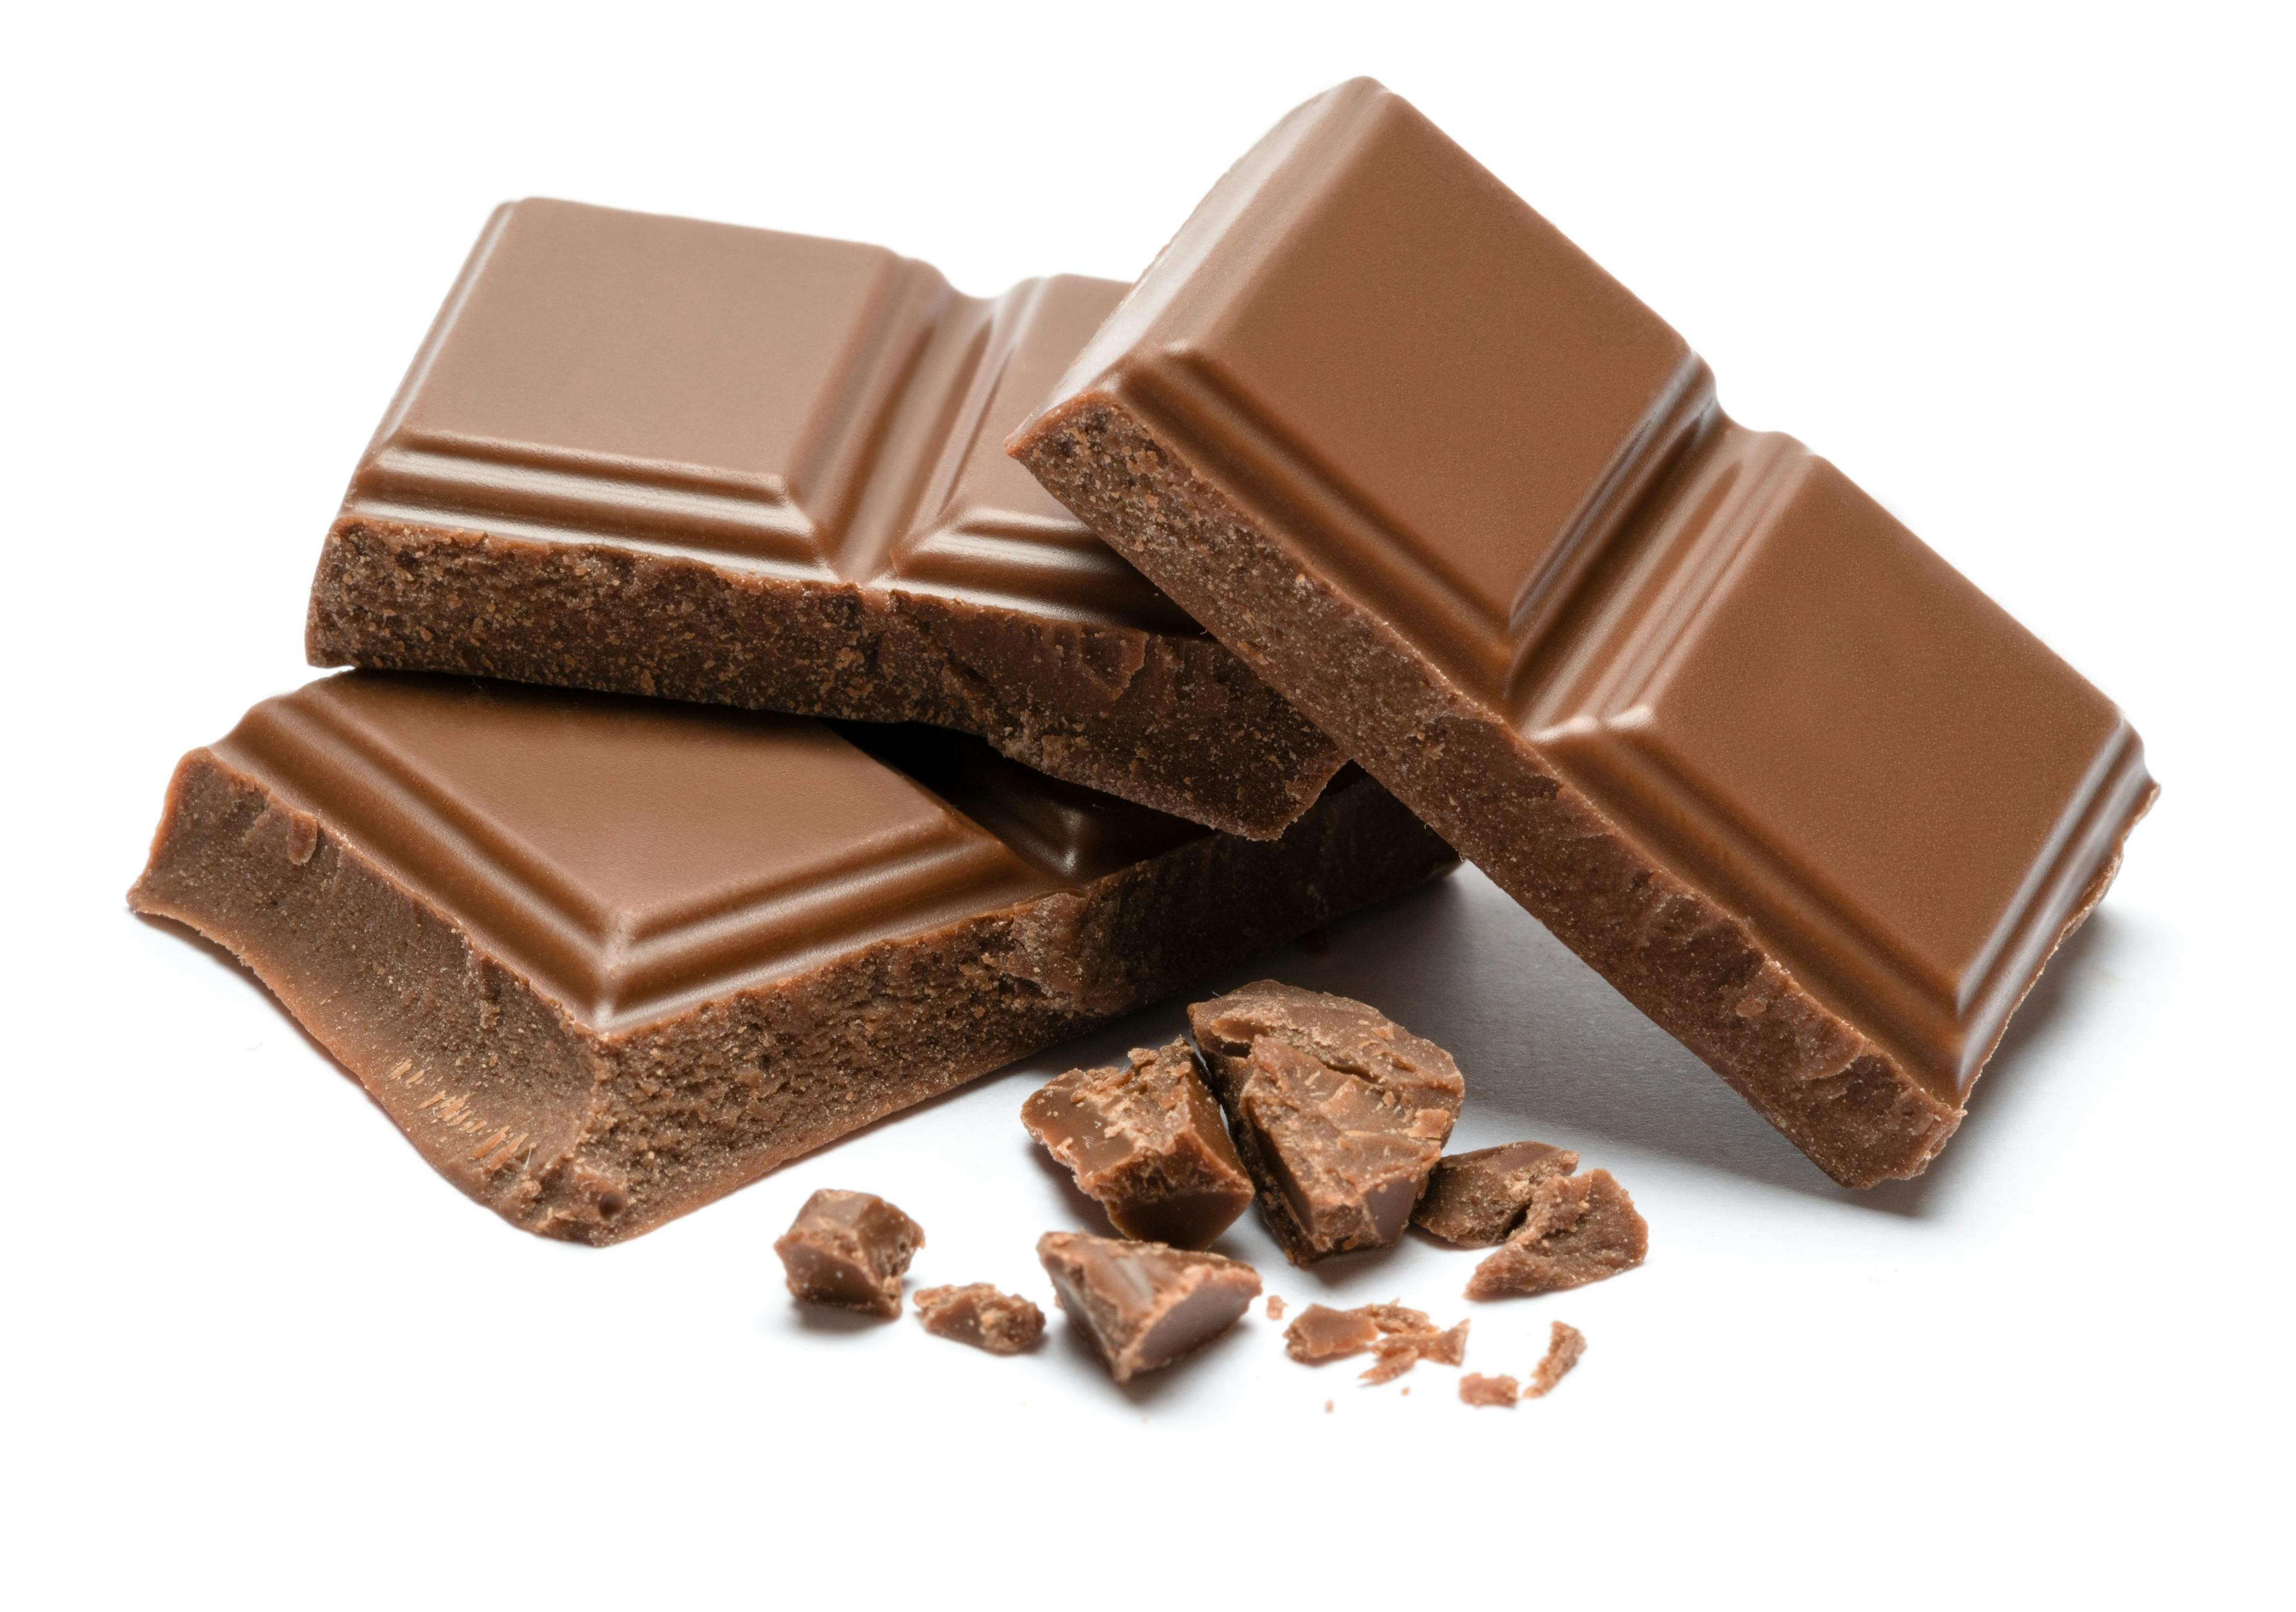 Investigating Glyoxal and Methylglyoxal Formation and Bioaccessibility in Chocolate with HPLC